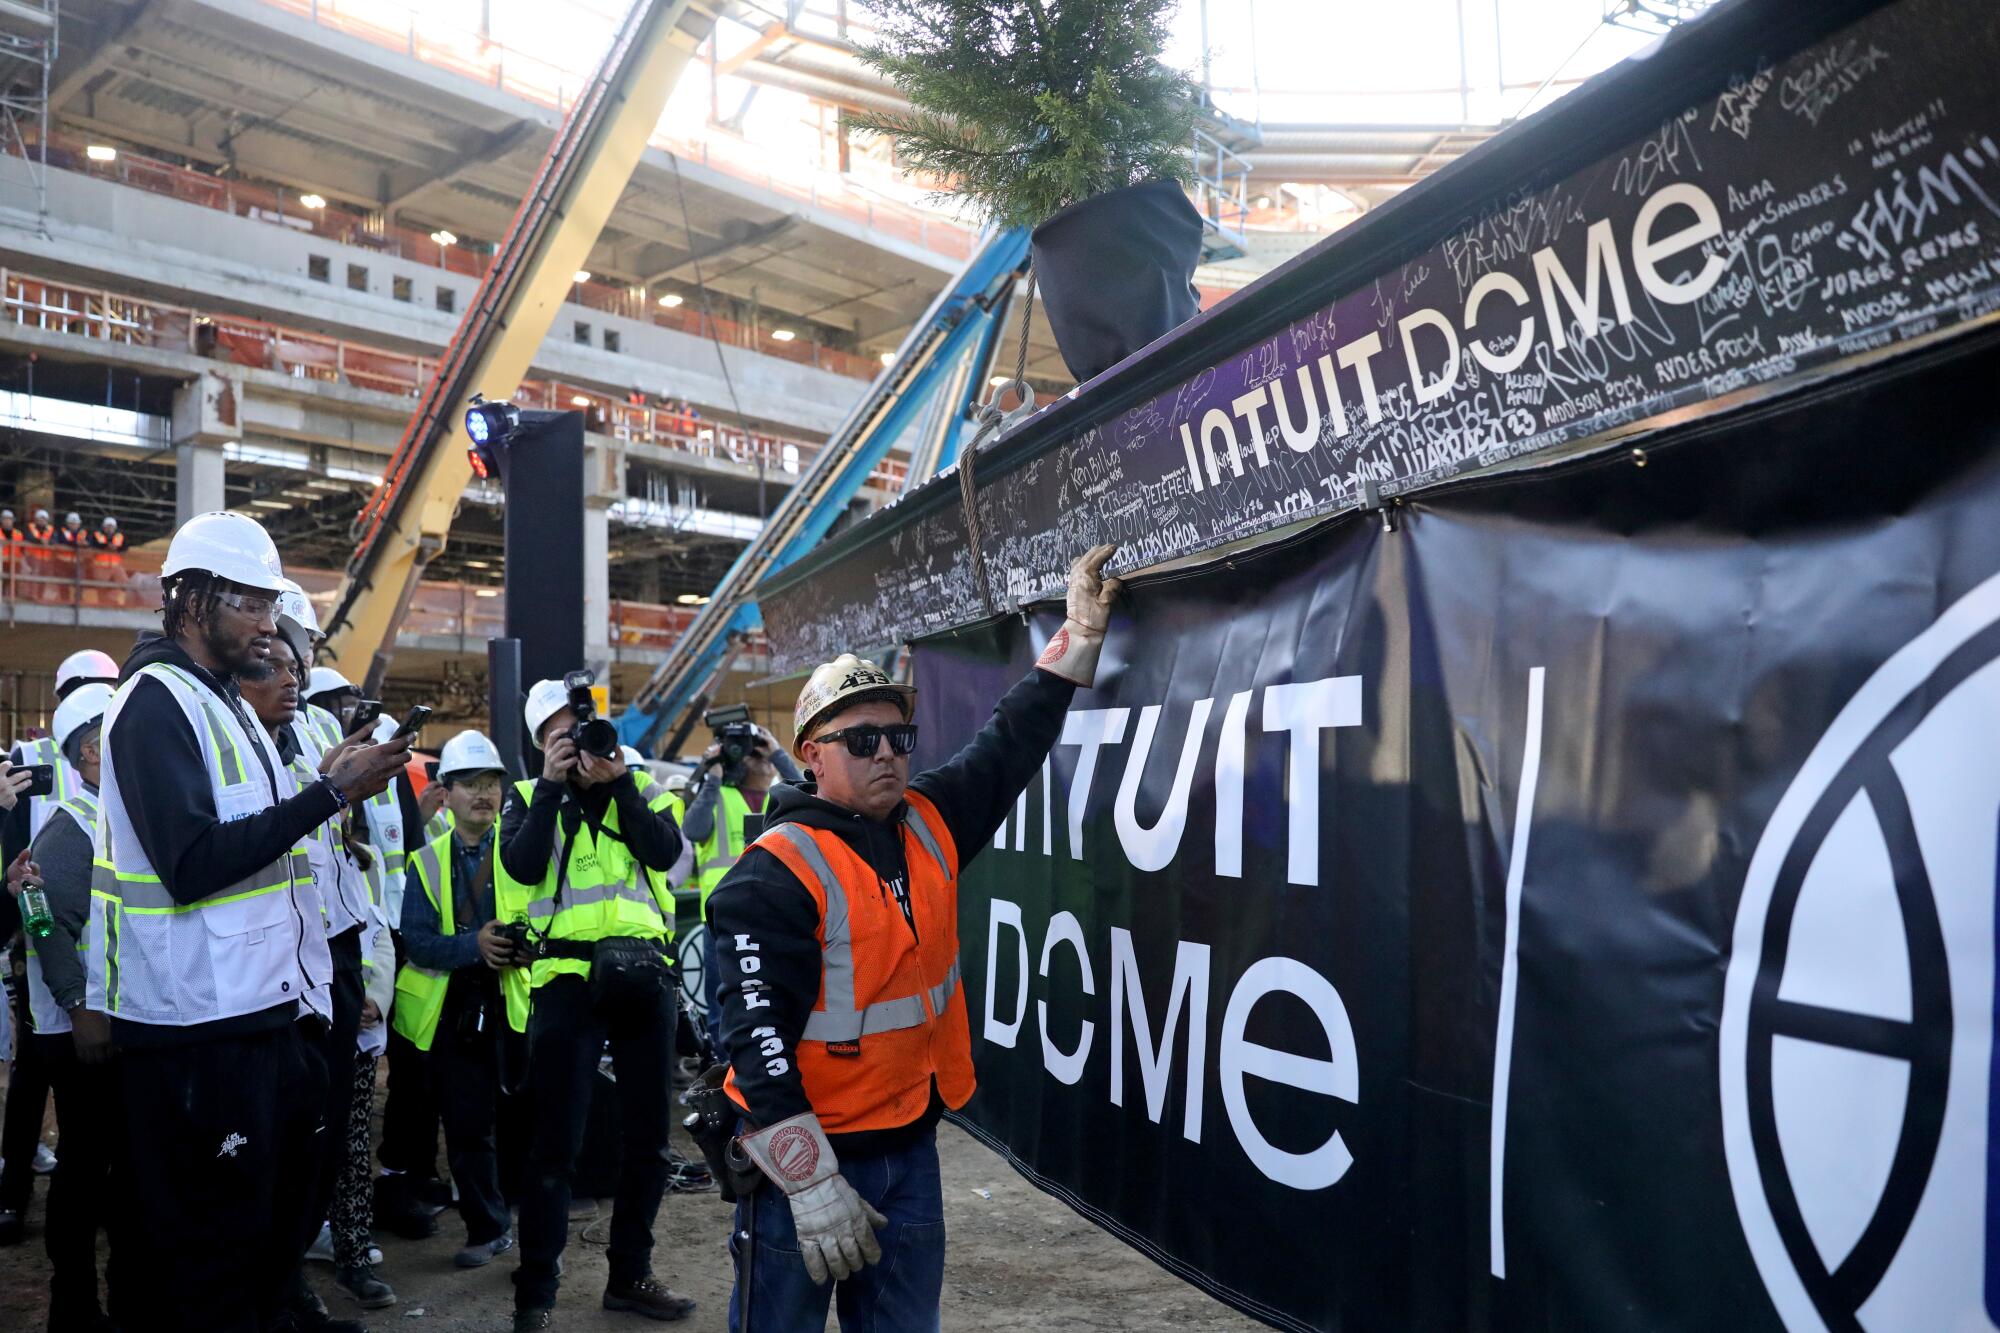 Construction workers prepare to raise a steel beam into place atop the roof of the Intuit Dome.